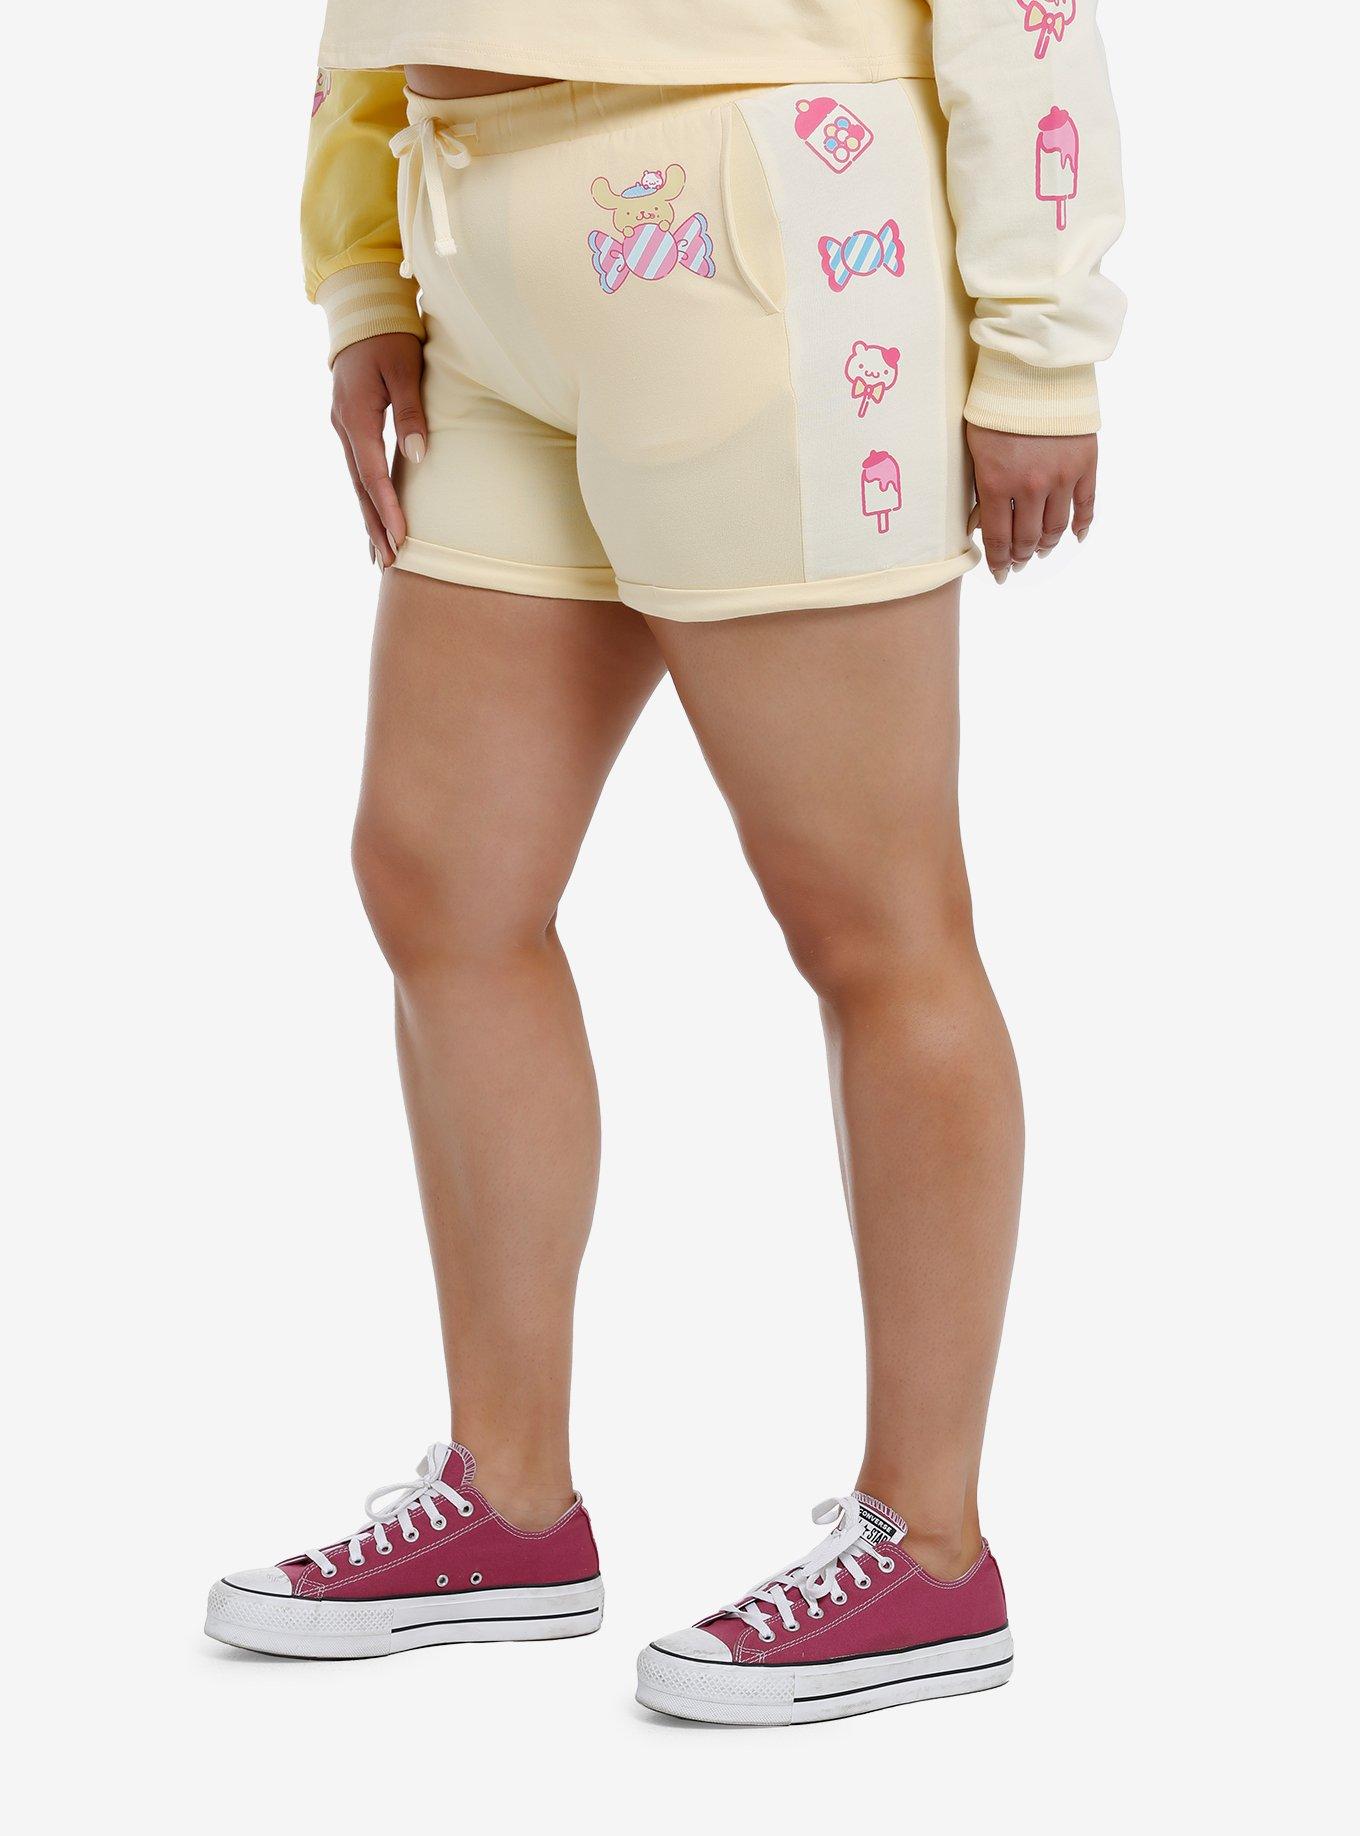 Pompompurin Sweets Lounge Shorts Plus